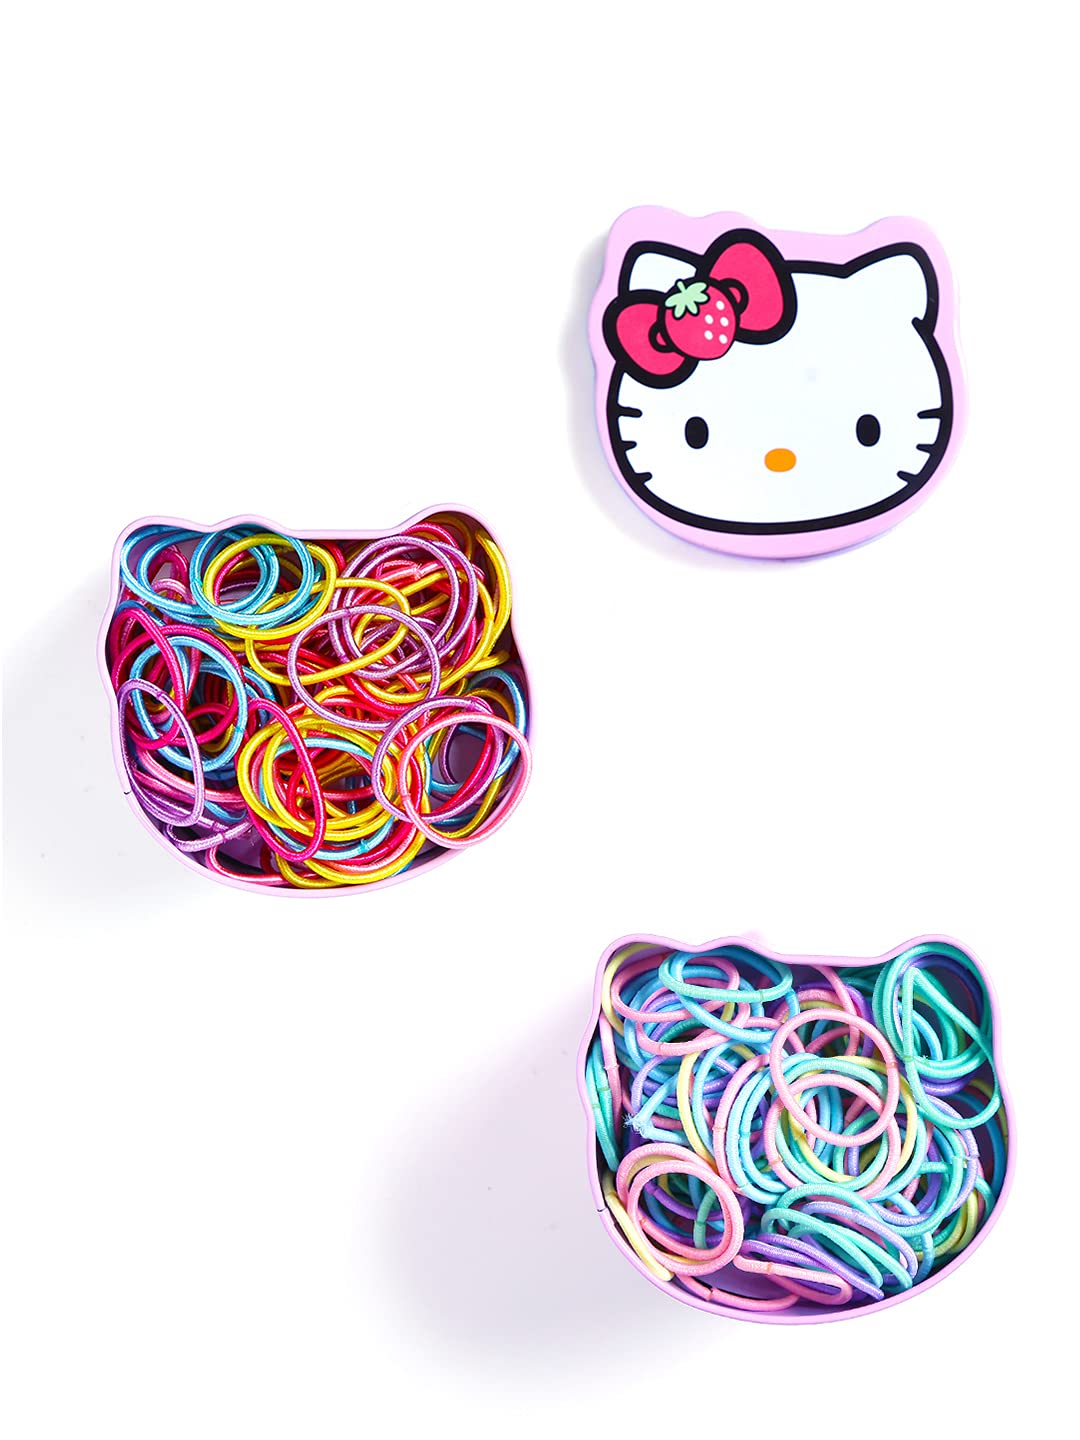 Melbees by Yellow Chimes Hair Rubber Bands for Girls Kids Hair Accessories for Girls Set of 200 Pcs Rubberbands Multicolor Soft & Stretchy Small Ponytail Holders with Kitty Tin Storage Box for Girls Kids Teens Toddlers